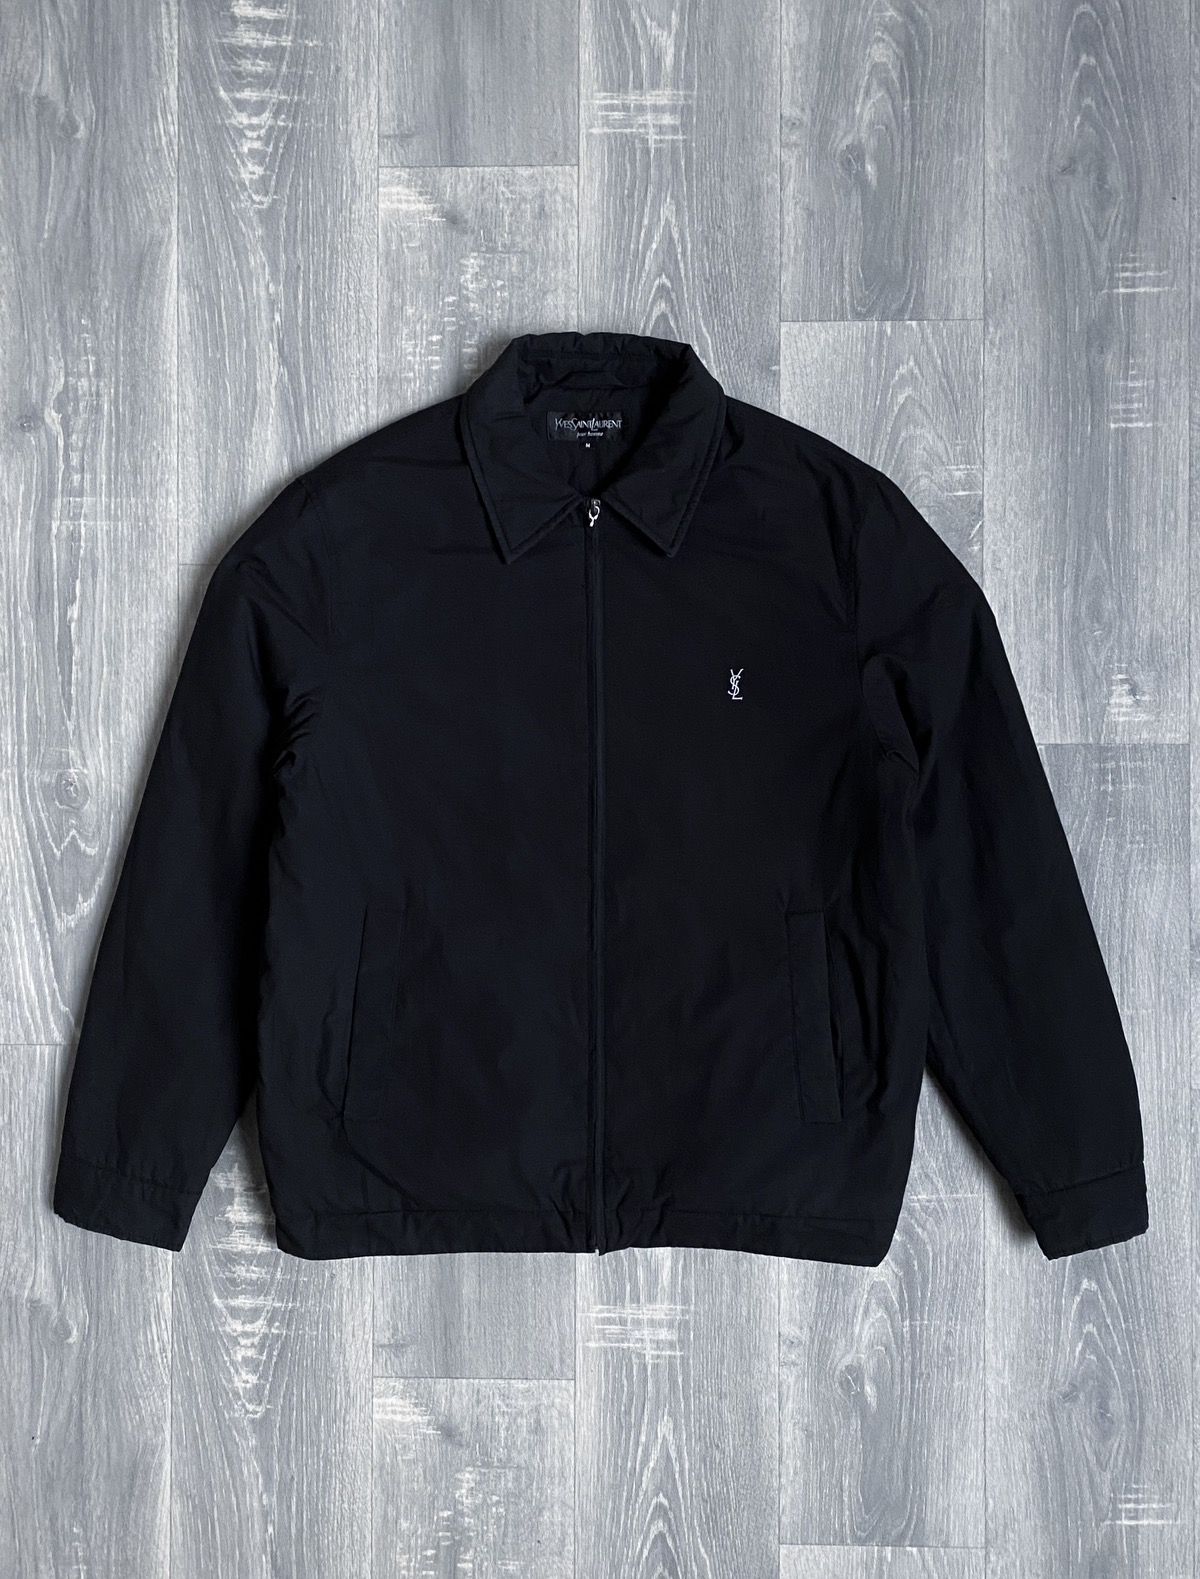 Ysl Pour Homme Ysl Bomber Jacket | Grailed